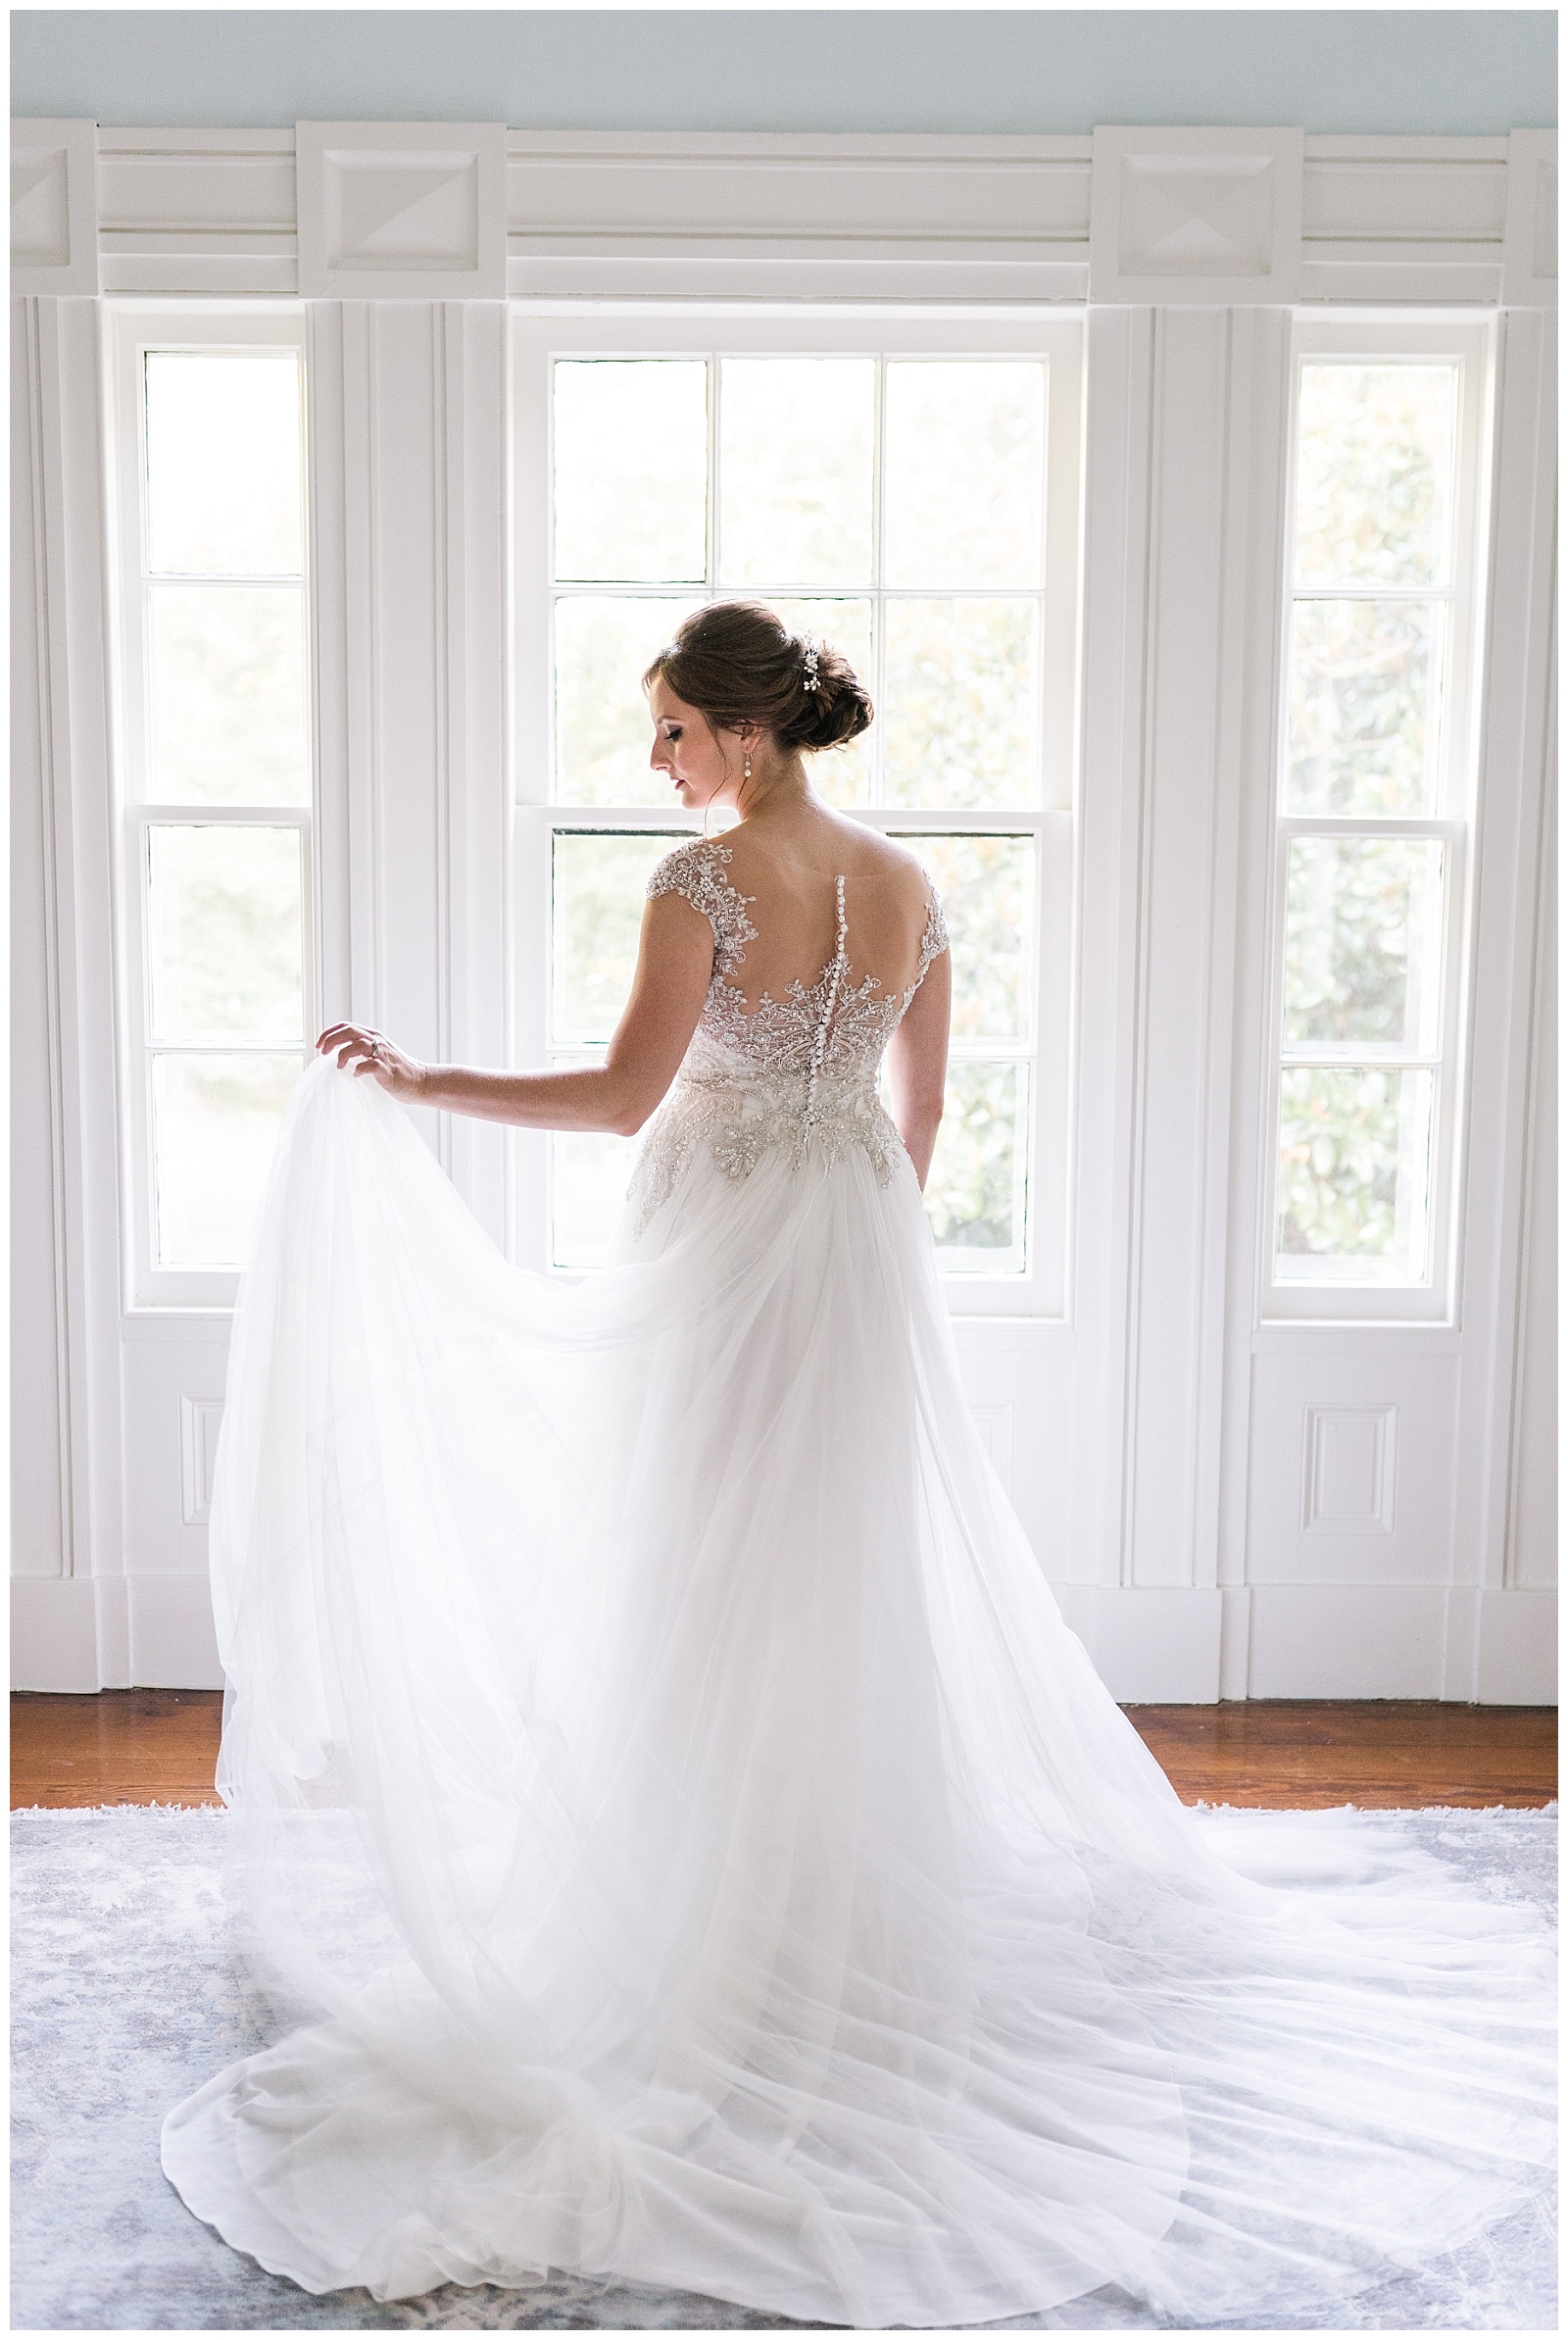 back of lace button up bridal gown in styled portrait session by bridal suite windows of historic wedding venue